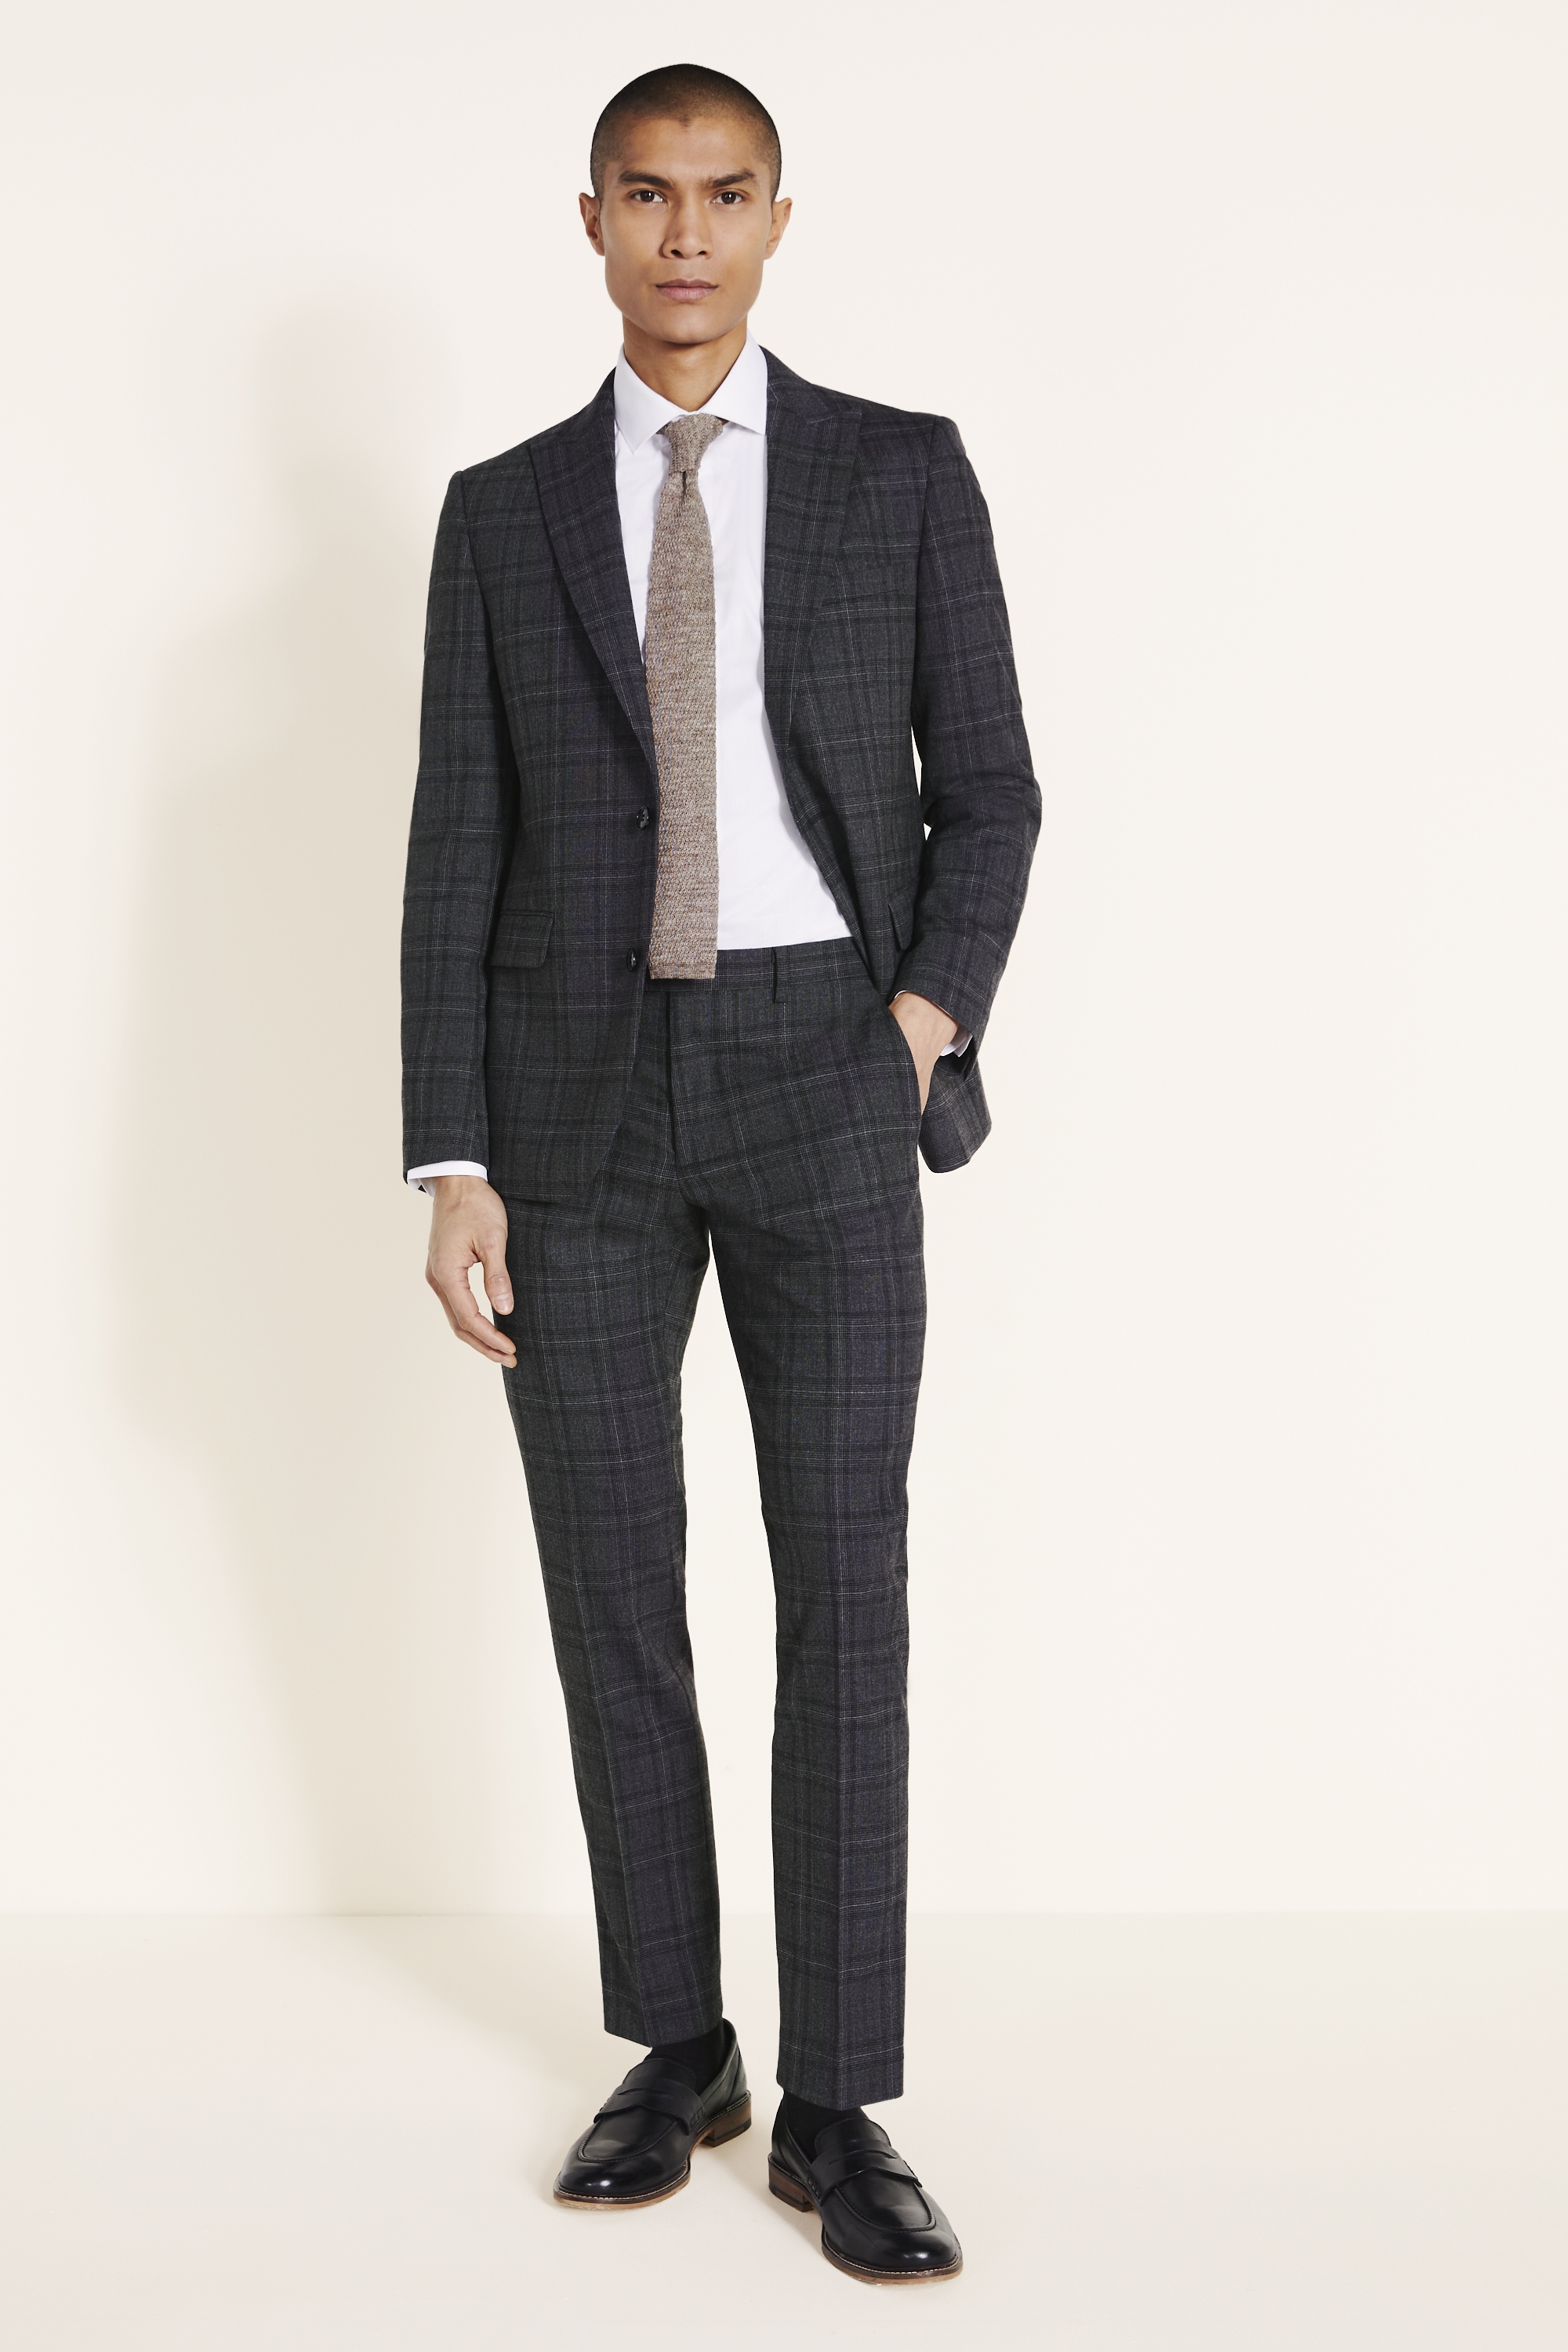 DKNY Slim Fit Charcoal Check Jacket | Buy Online at Moss